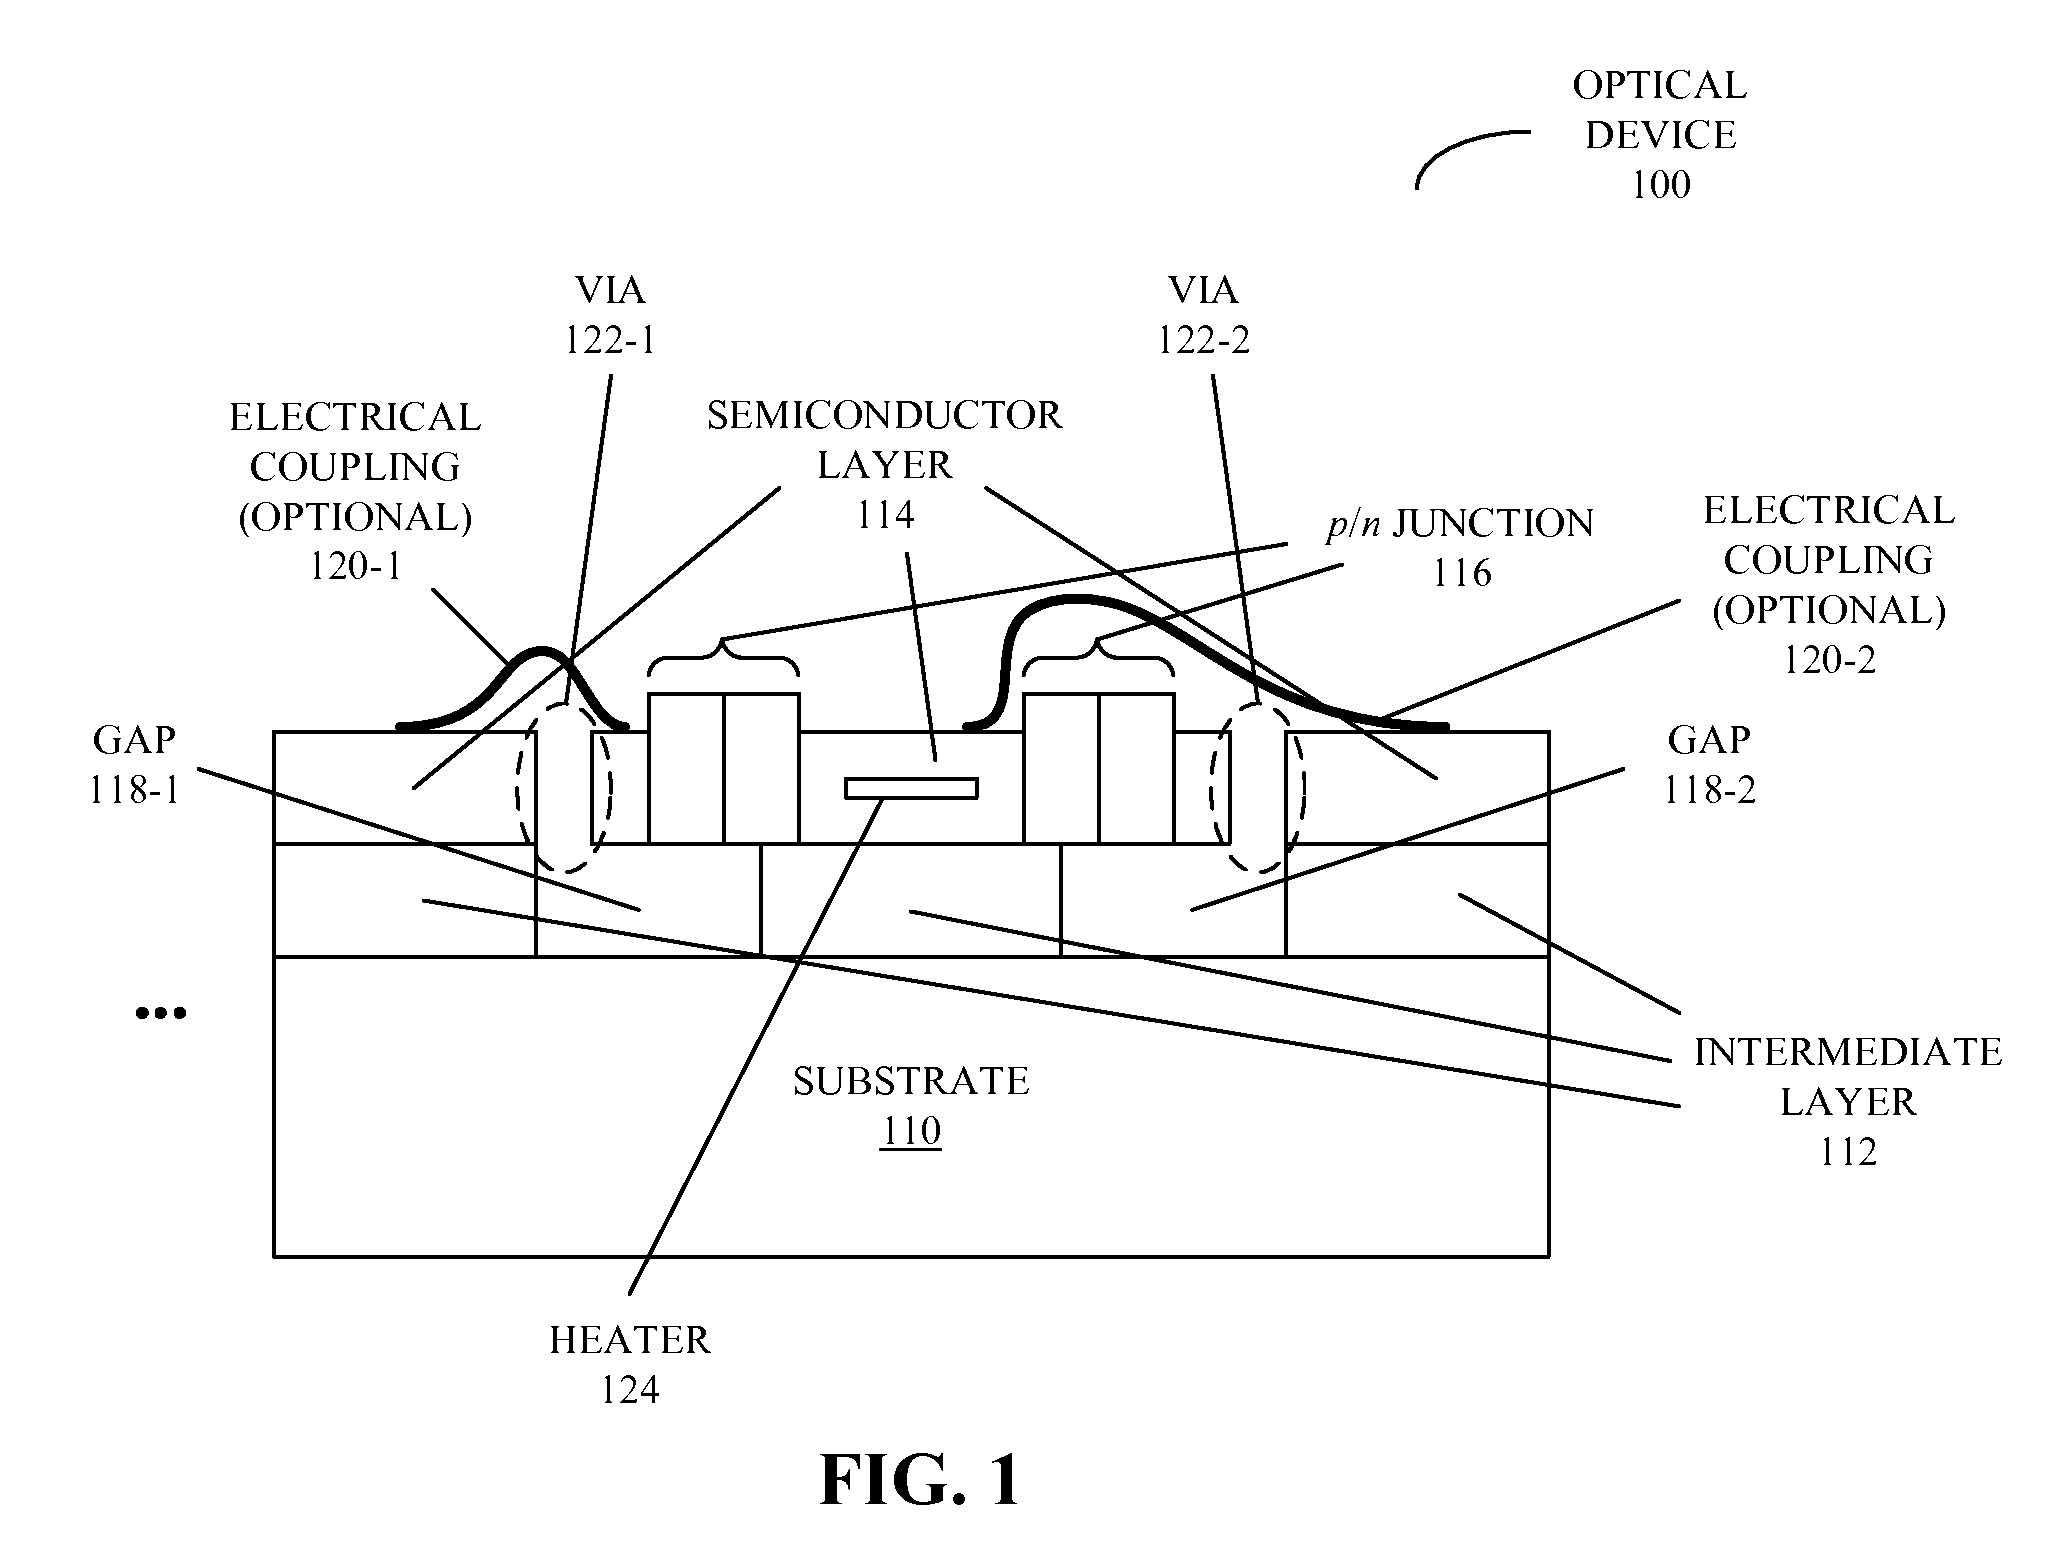 Thermal tuning of an optical device